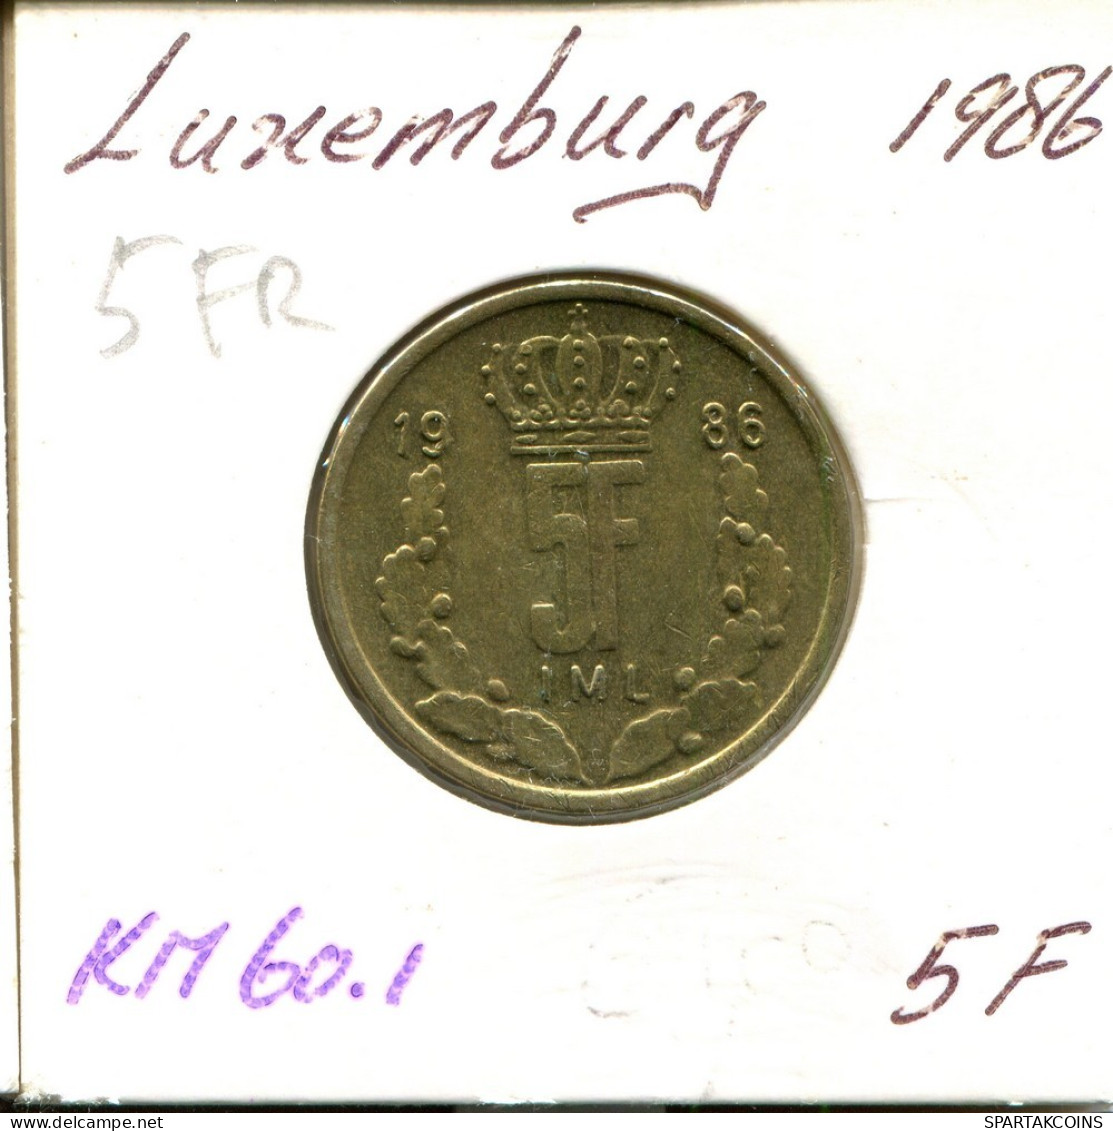 5 FRANCS 1986 LUXEMBURG LUXEMBOURG Münze #AT233.D.A - Luxemburg